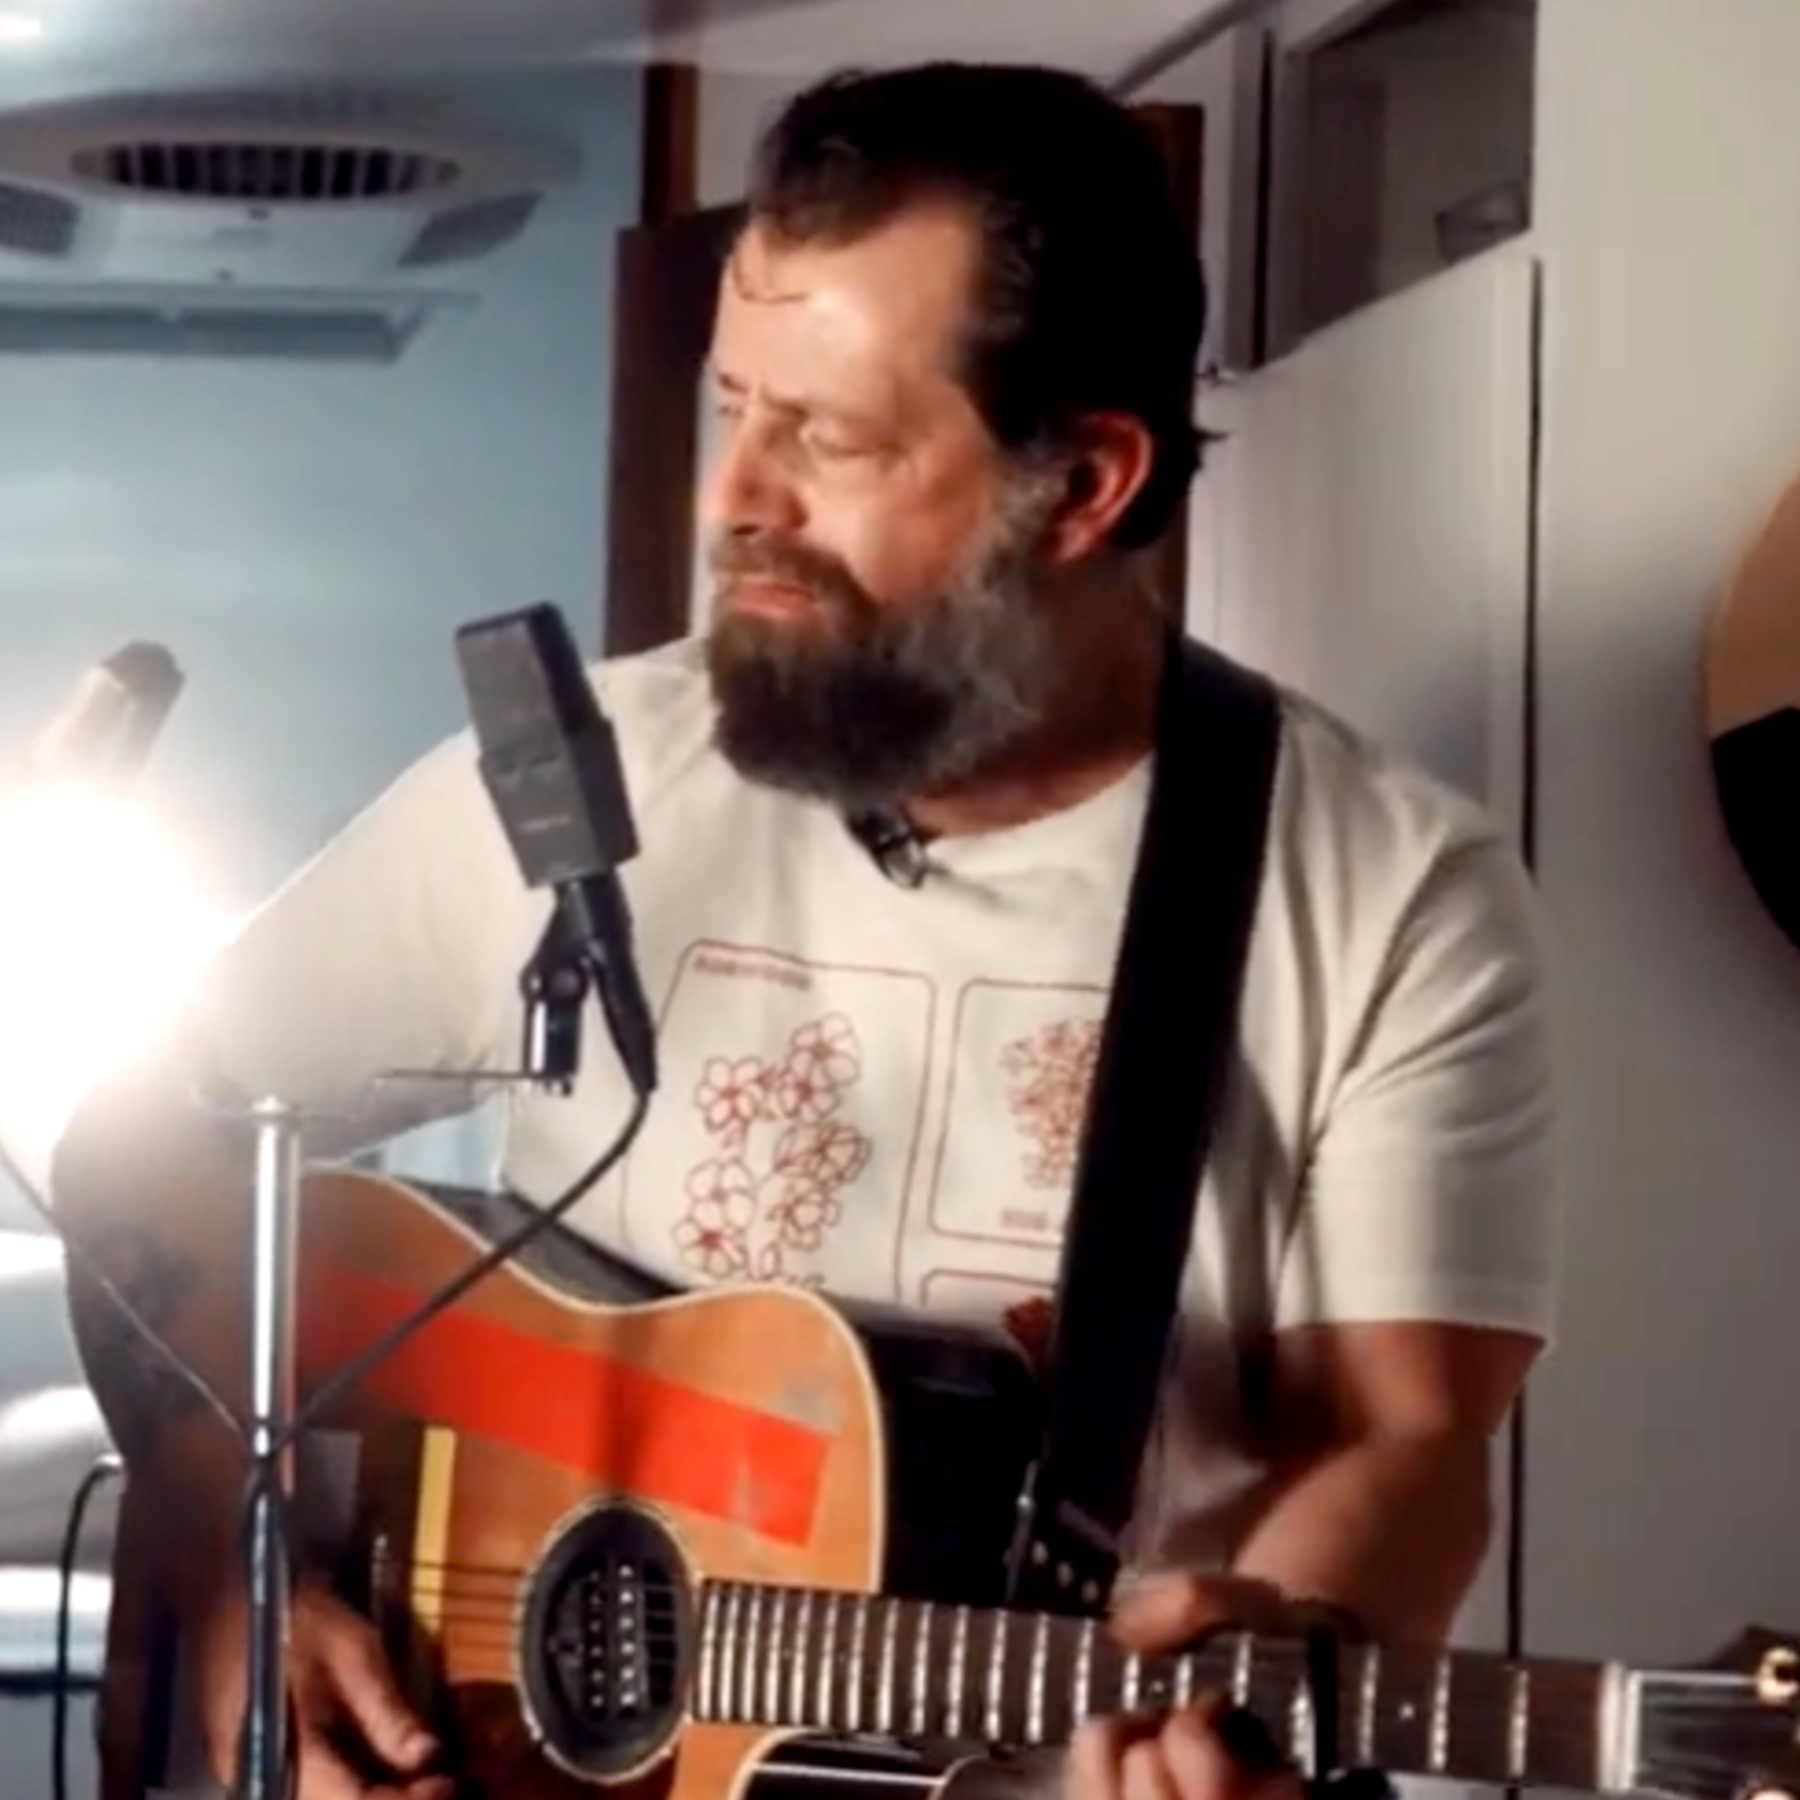 WATCH: D'Addario Presents Guitar Power Acoustic with Sean Watkins and Jackie Greene